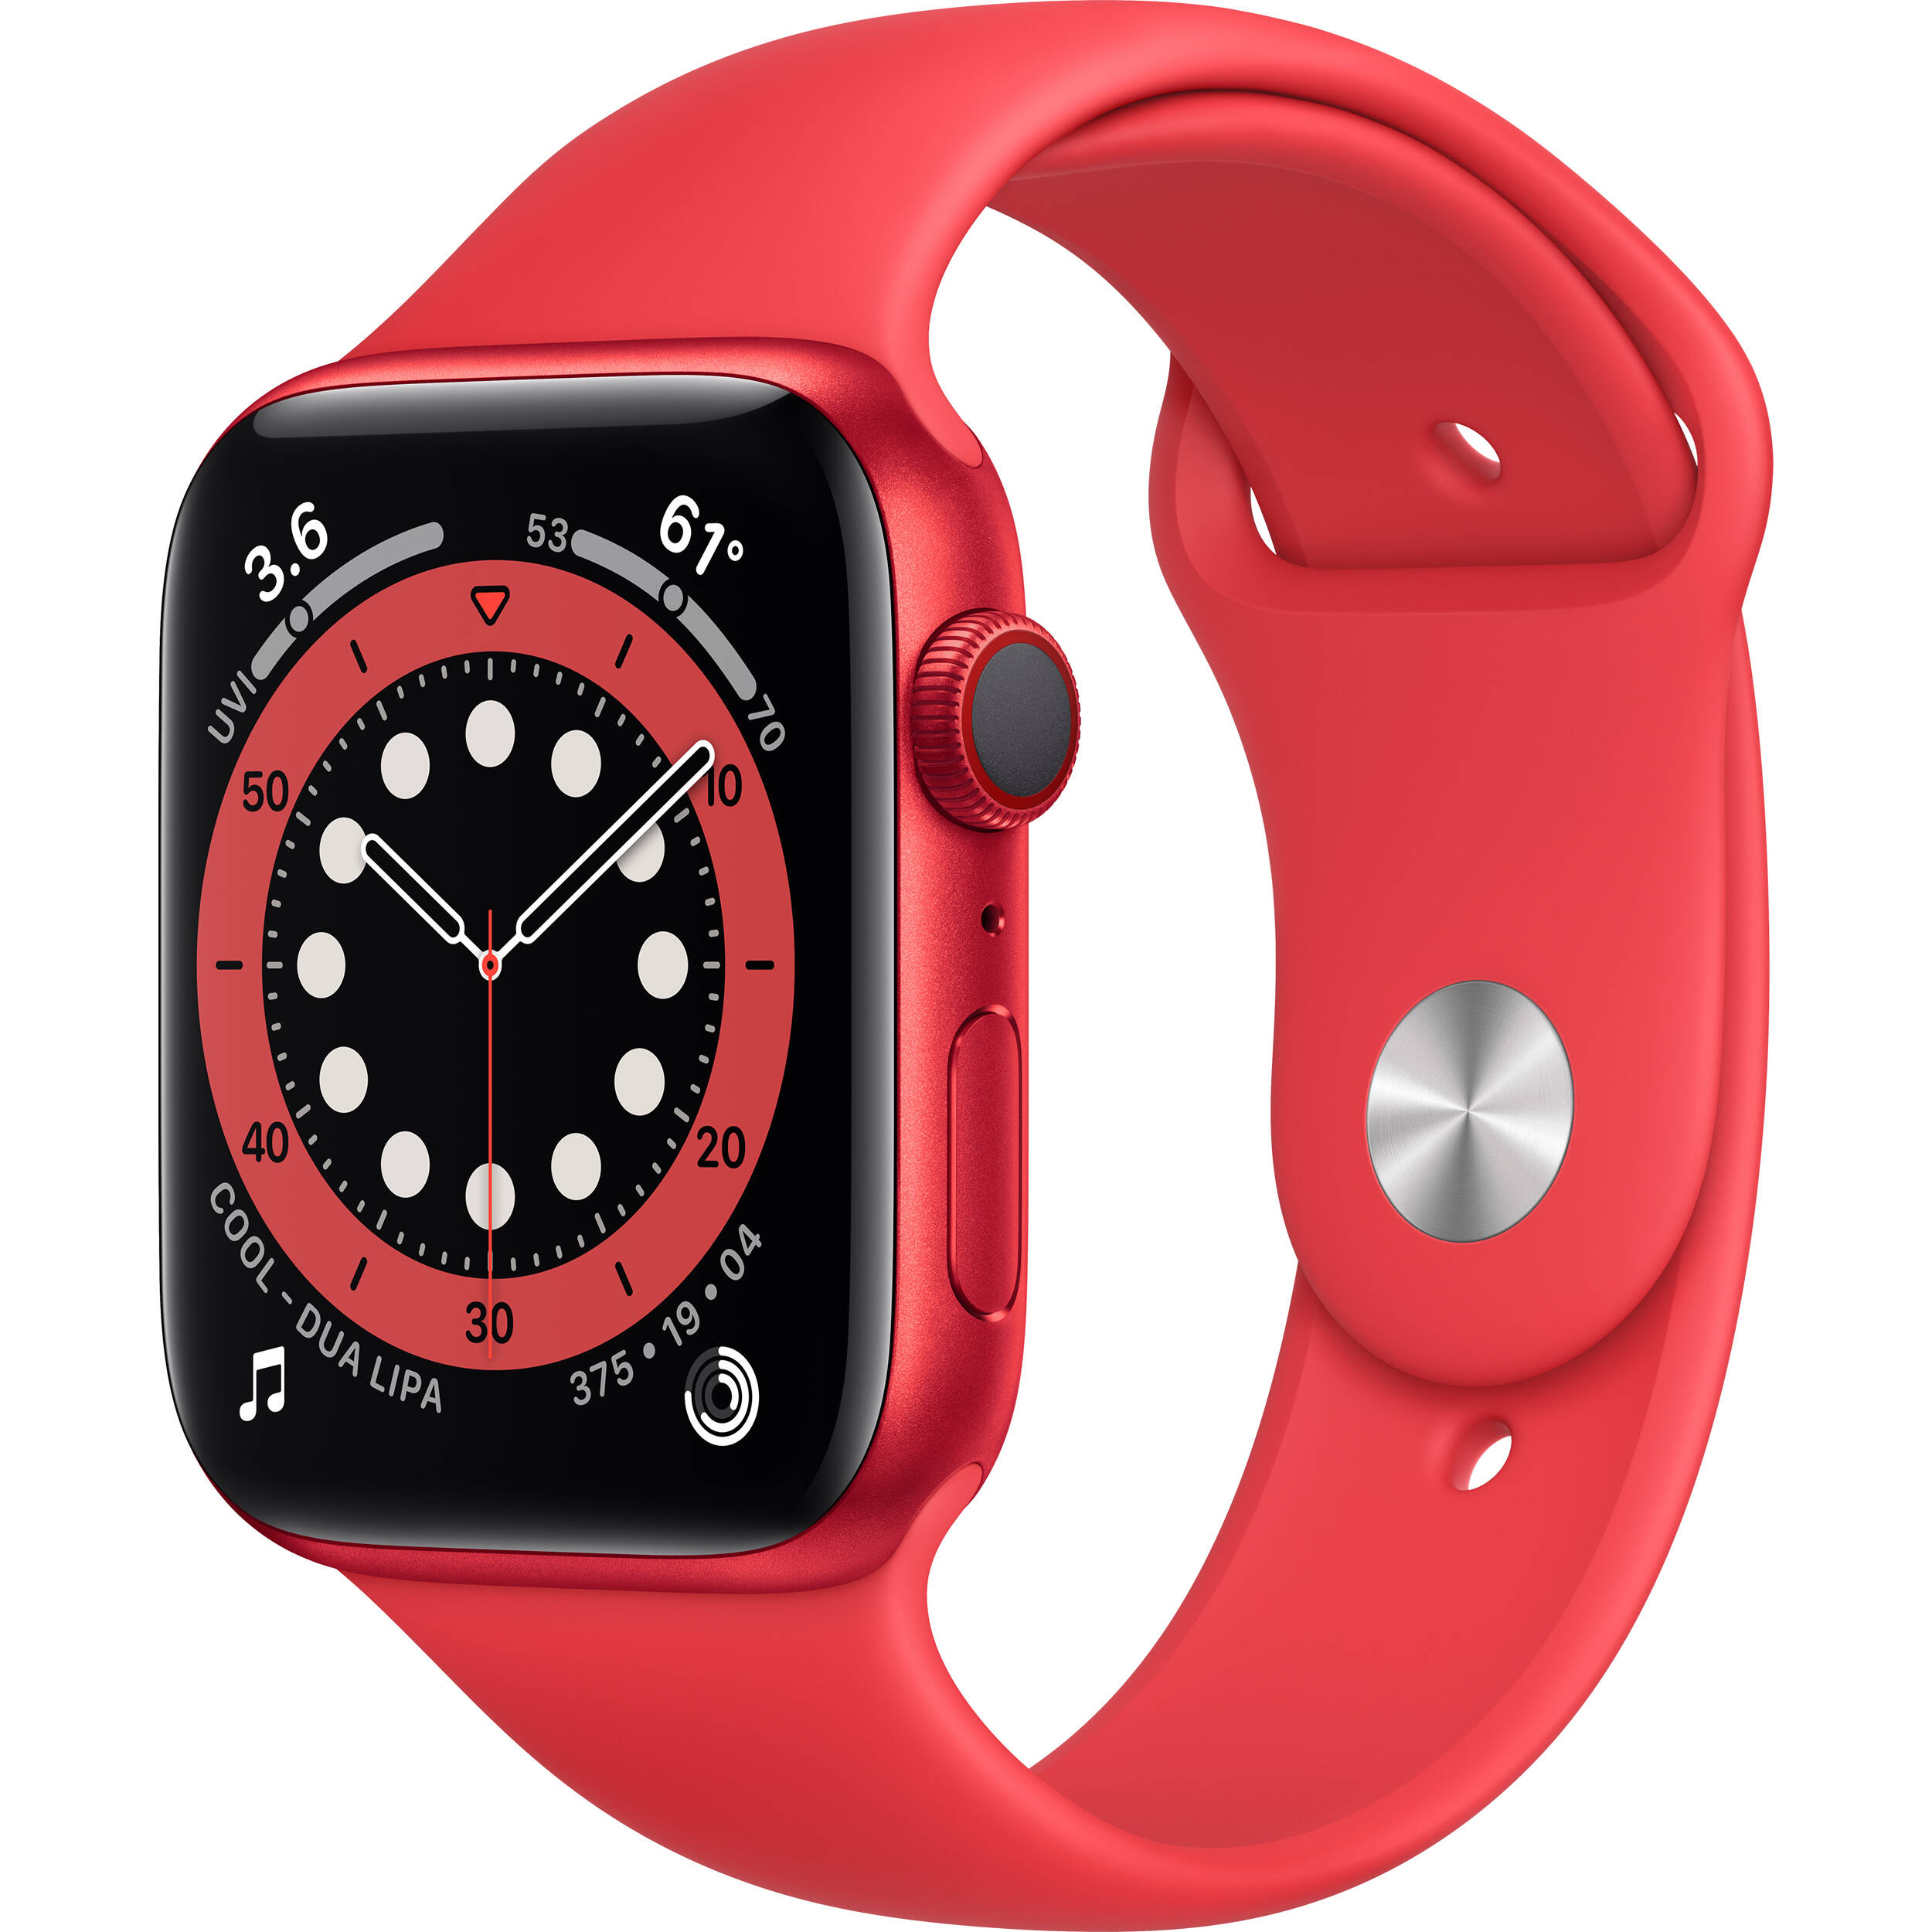 Apple Watch Series 6 (GPS + Cellular) - (PRODUCT) RED - 44 mm - red aluminum - smart watch with sport band - fluoroelastomer - red - band size: S/M/L - 32 GB - Wi-Fi, Bluetooth - 4G - 1.29 oz - image 1 of 8